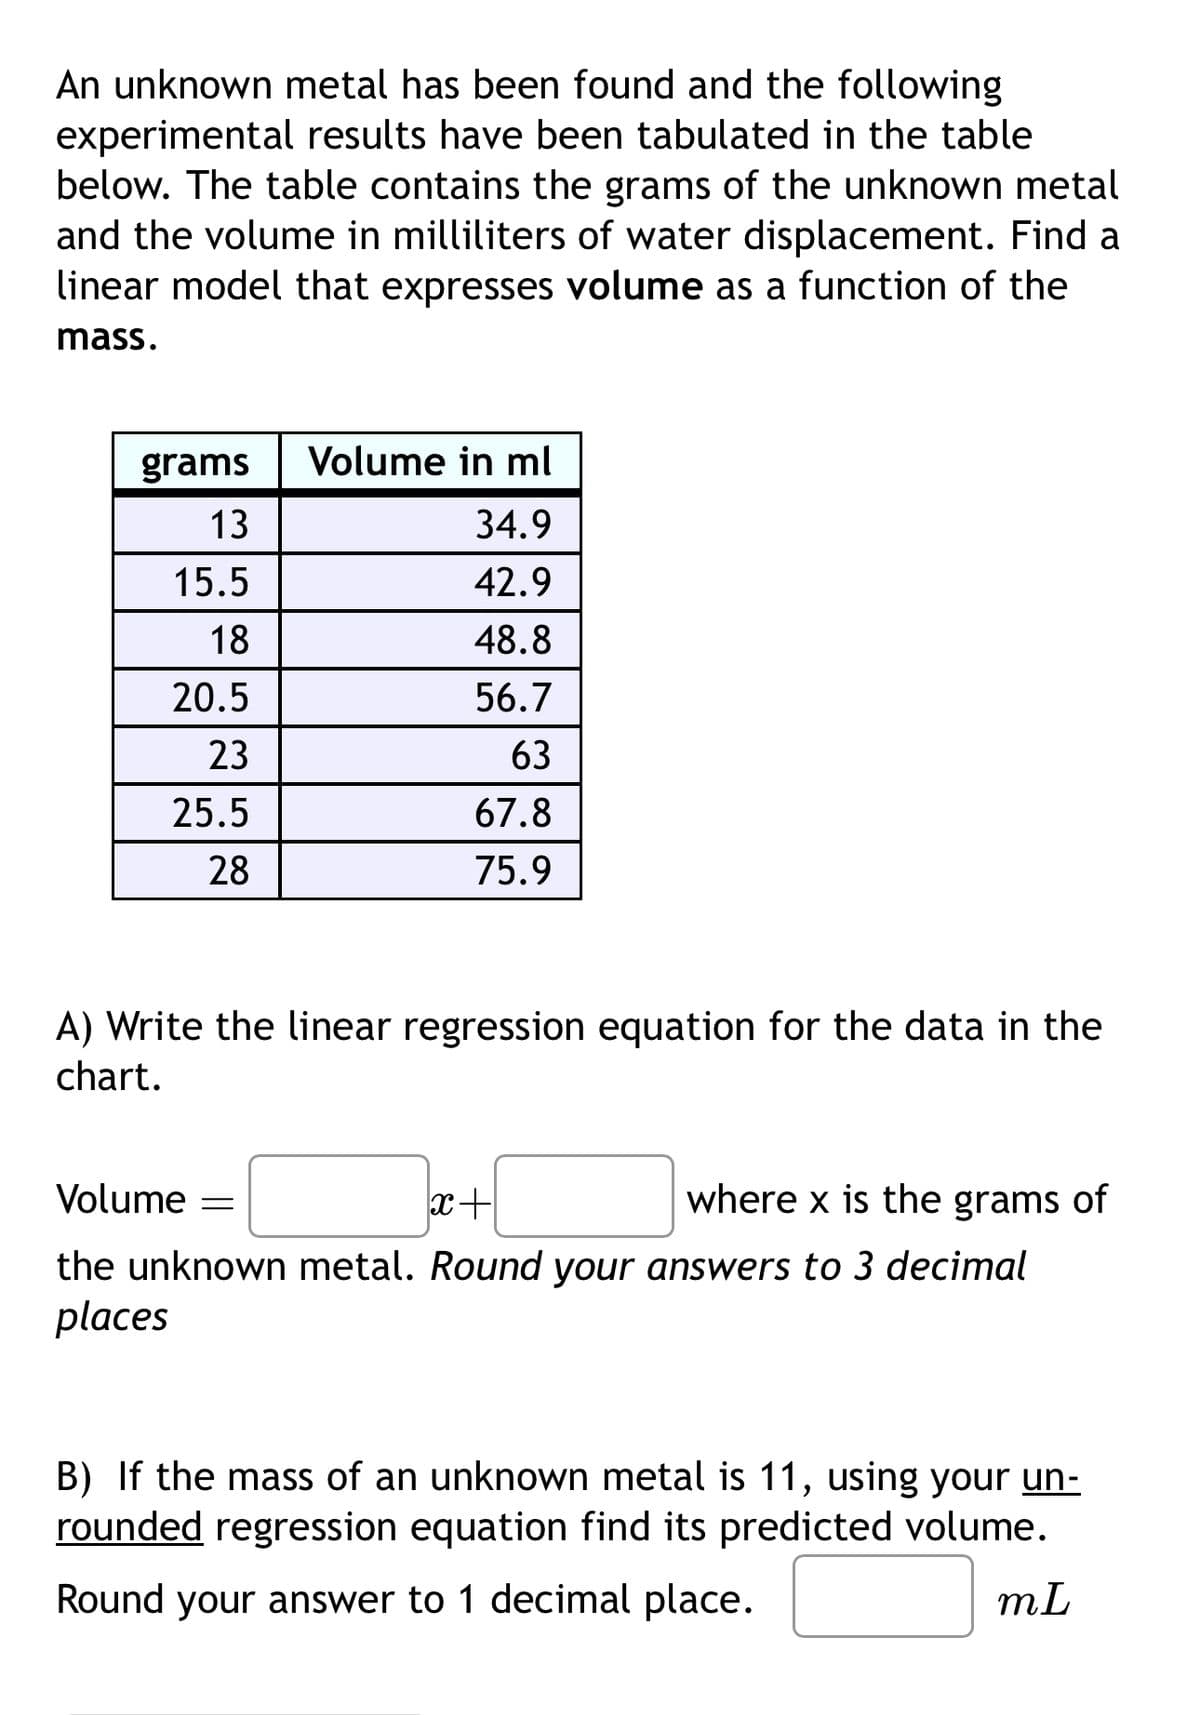 An unknown metal has been found and the following
experimental results have been tabulated in the table
below. The table contains the grams of the unknown metal
and the volume in milliliters of water displacement. Find a
linear model that expresses volume as a function of the
mass.
grams
13
Volume in ml
34.9
15.5
42.9
18
48.8
20.5
56.7
23
63
25.5
67.8
28
75.9
A) Write the linear regression equation for the data in the
chart.
Volume =
x+
where x is the grams of
the unknown metal. Round your answers to 3 decimal
places
B) If the mass of an unknown metal is 11, using your un-
rounded regression equation find its predicted volume.
Round your answer to 1 decimal place.
mL